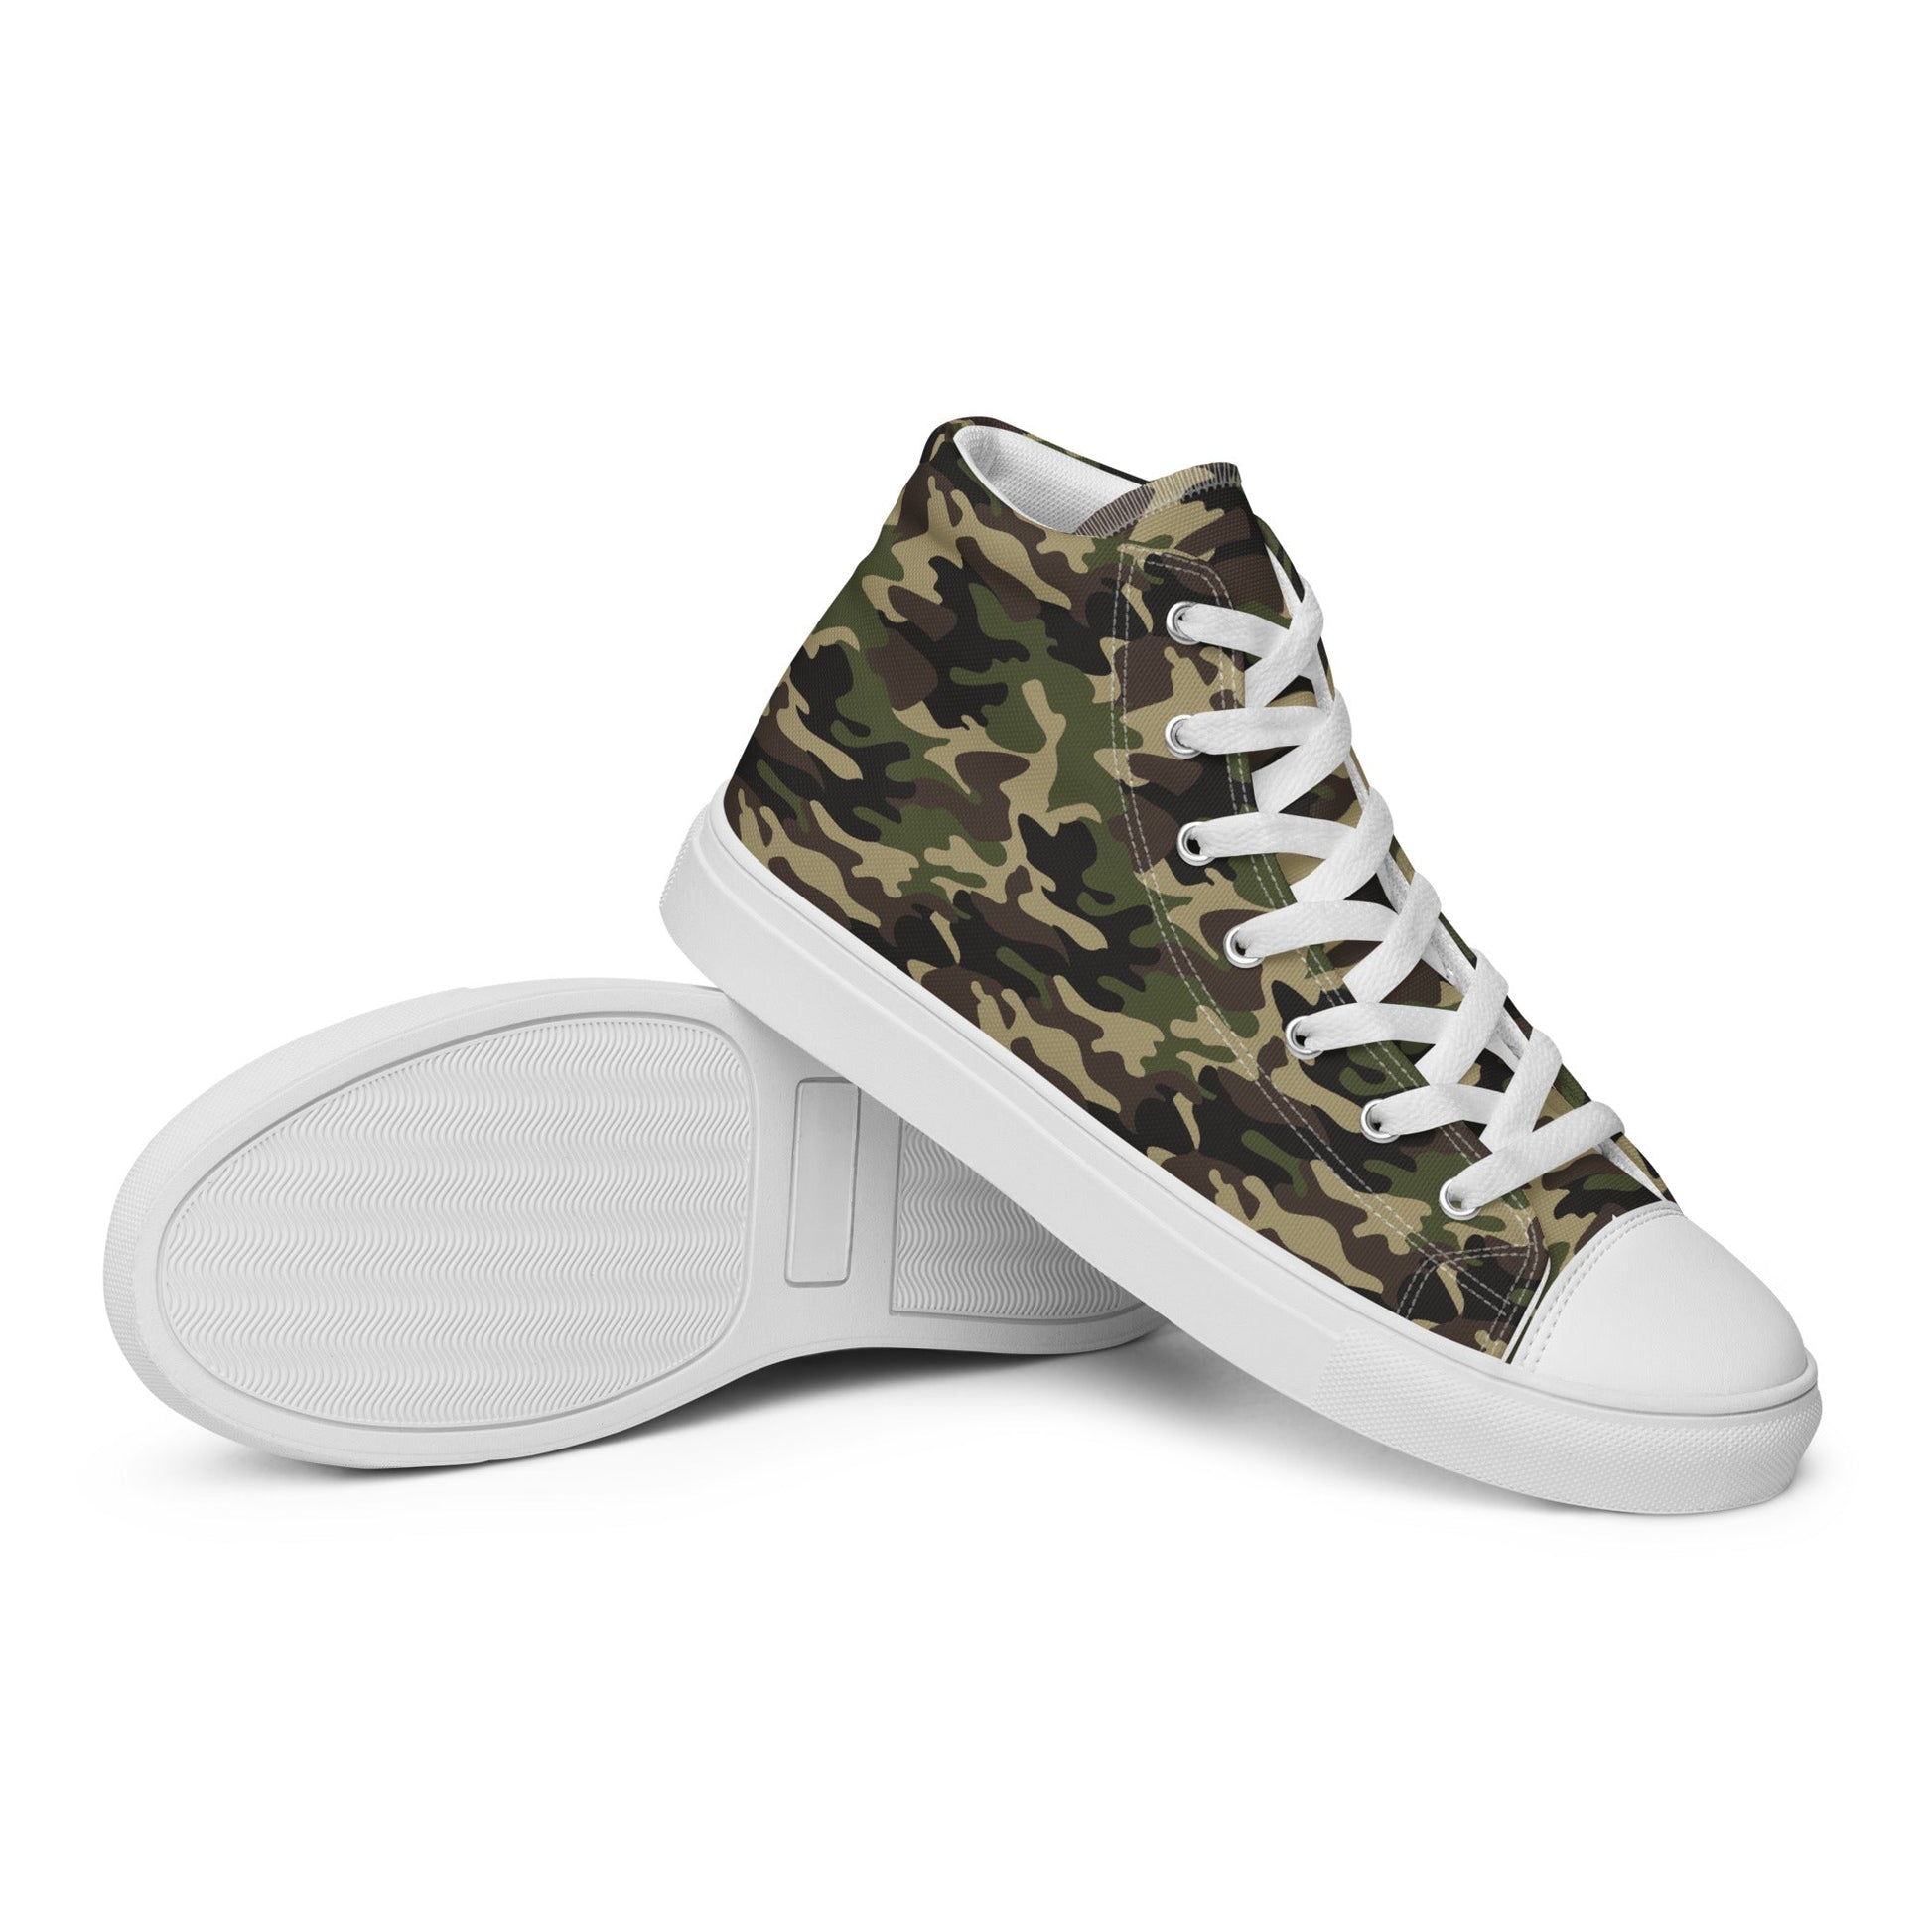 Men’s Camouflage Sneakers - DoggyLoveandMore